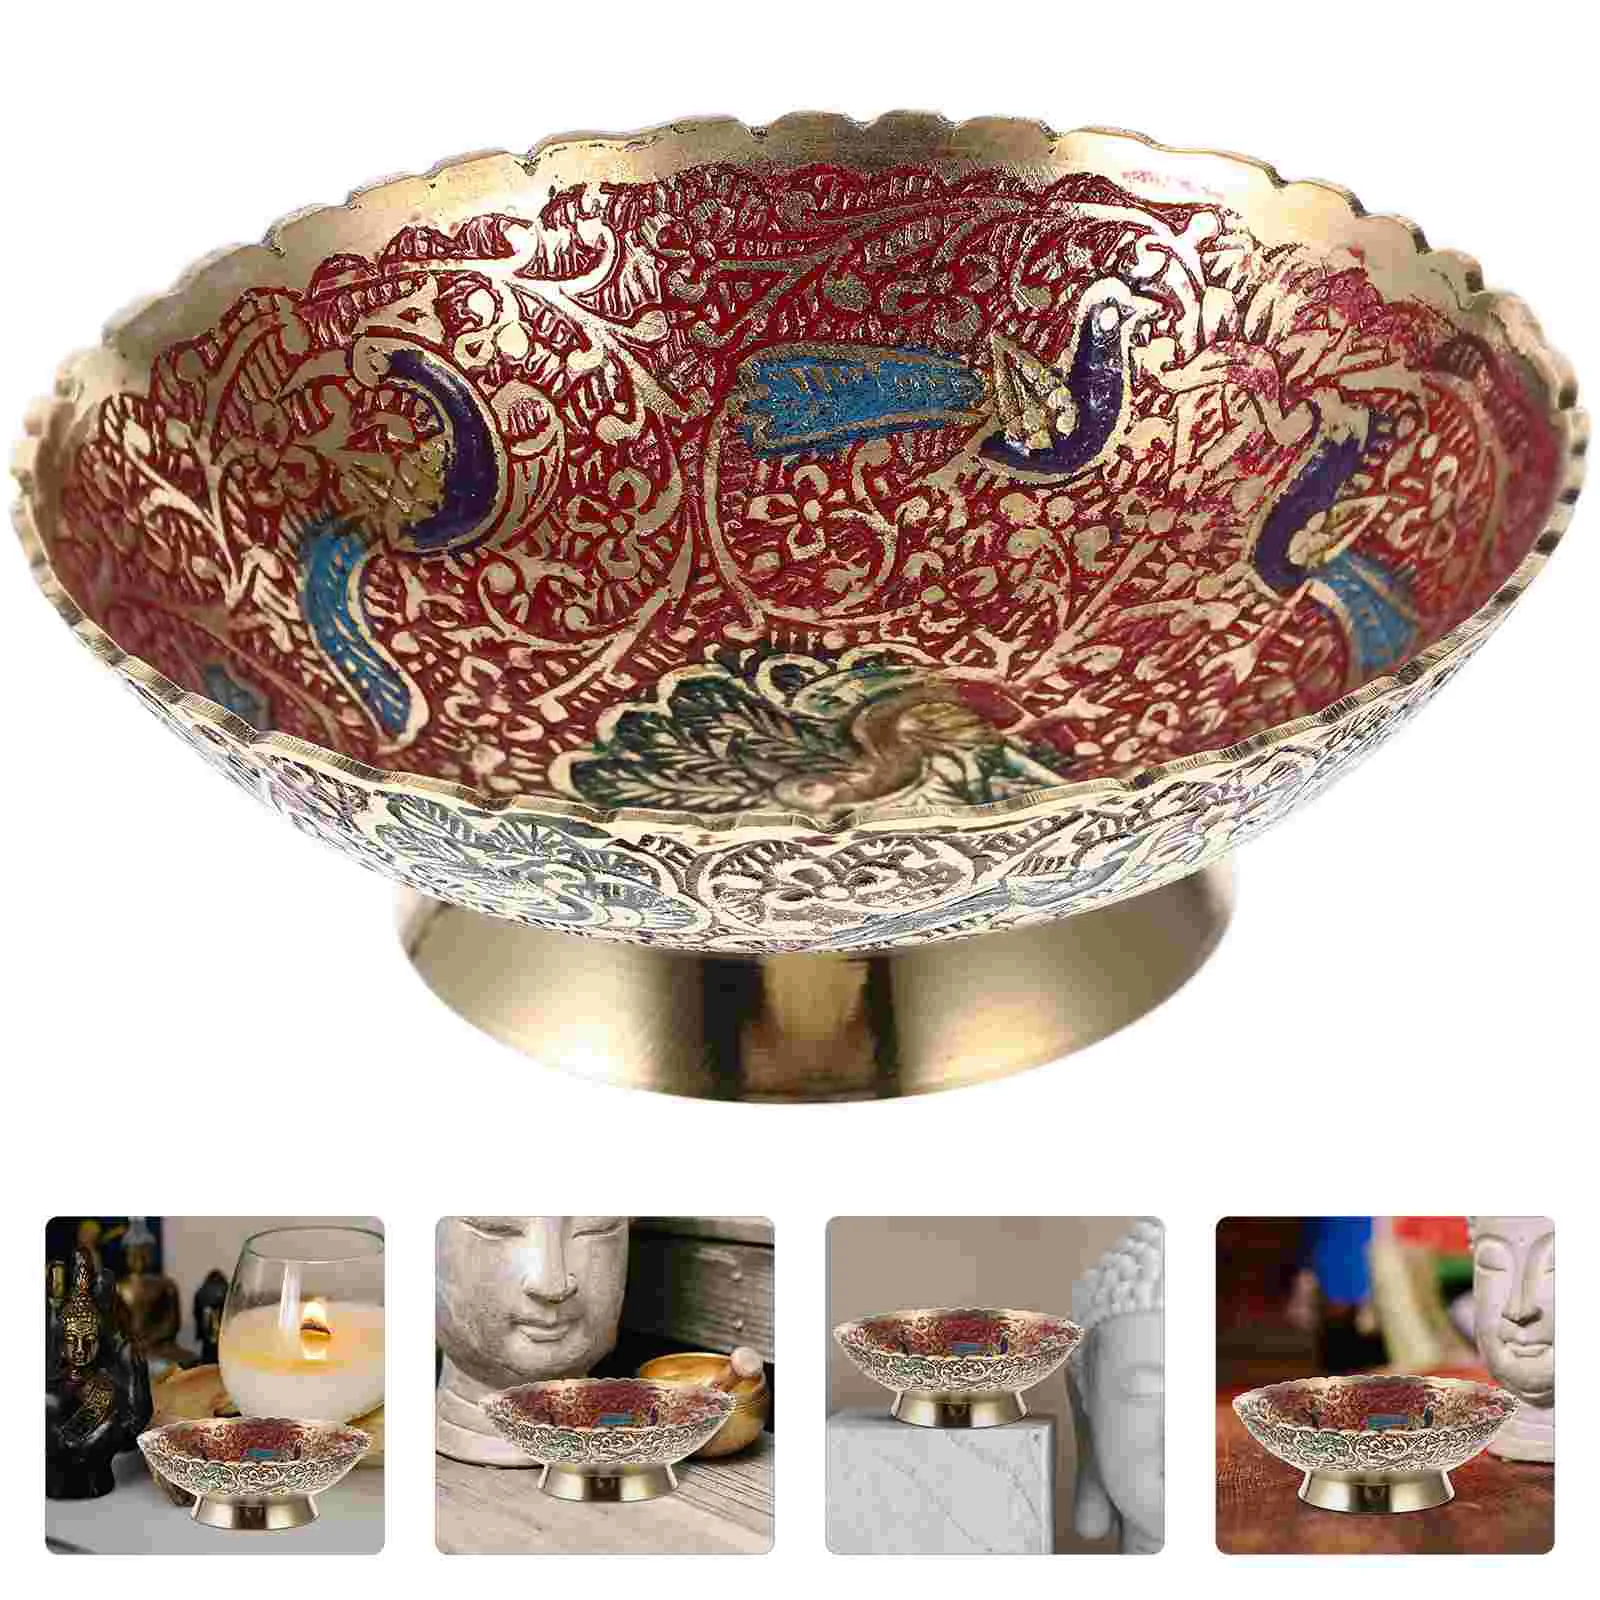 

Buddhist Plate Offering Bowls Temple Fruit Tray Food Dessert Snack Plate Altar Use Rituals Incense Smudging Decoration